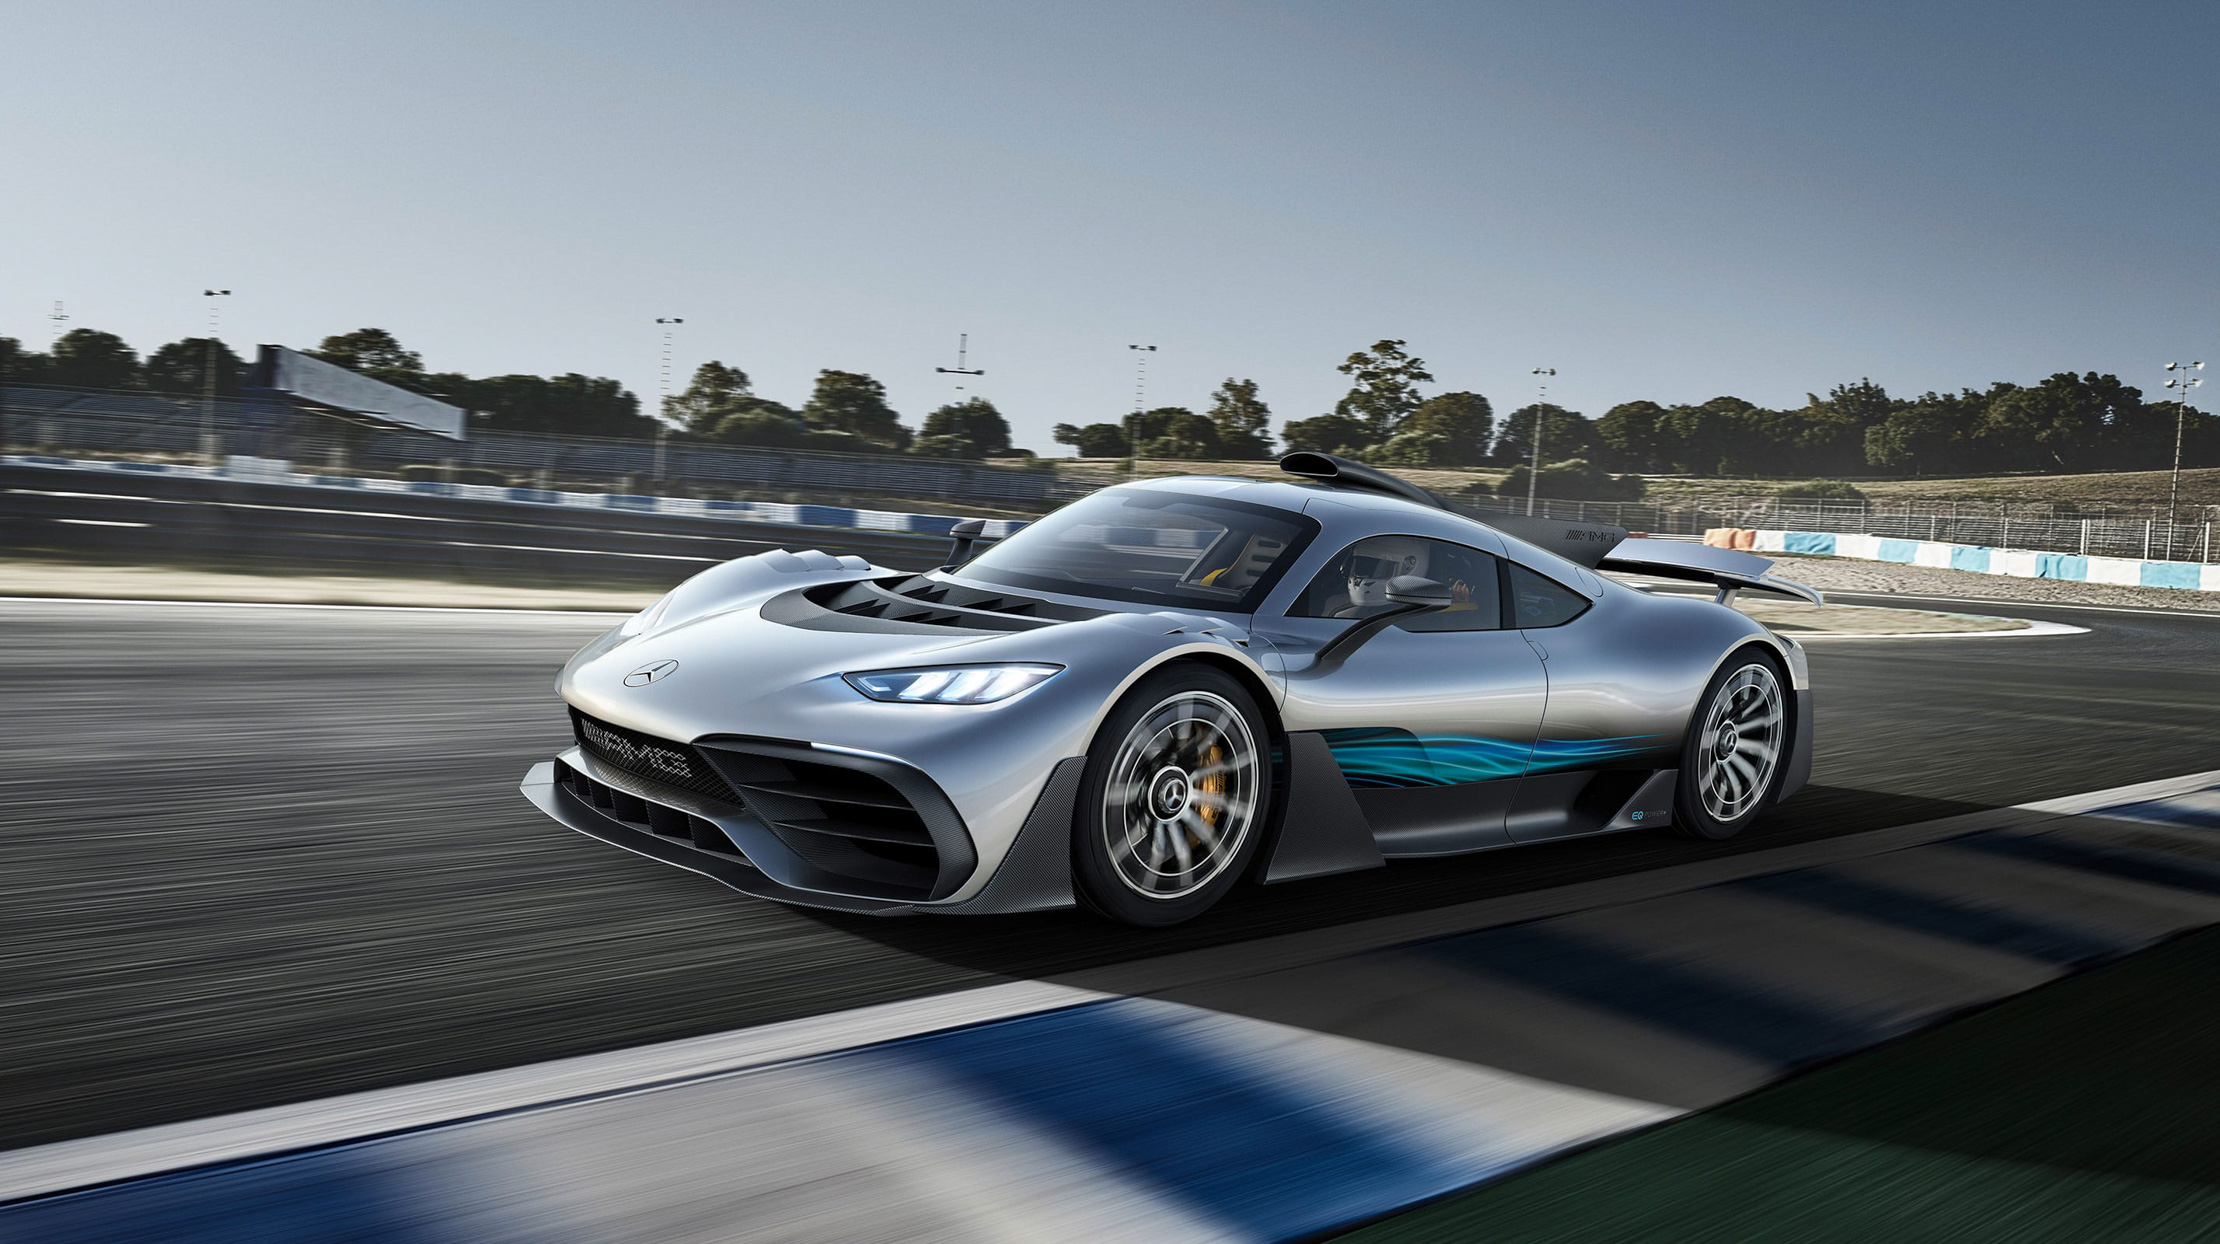 Mercedes-AMG Considered Cancelling Its F1 Supercar Many Times